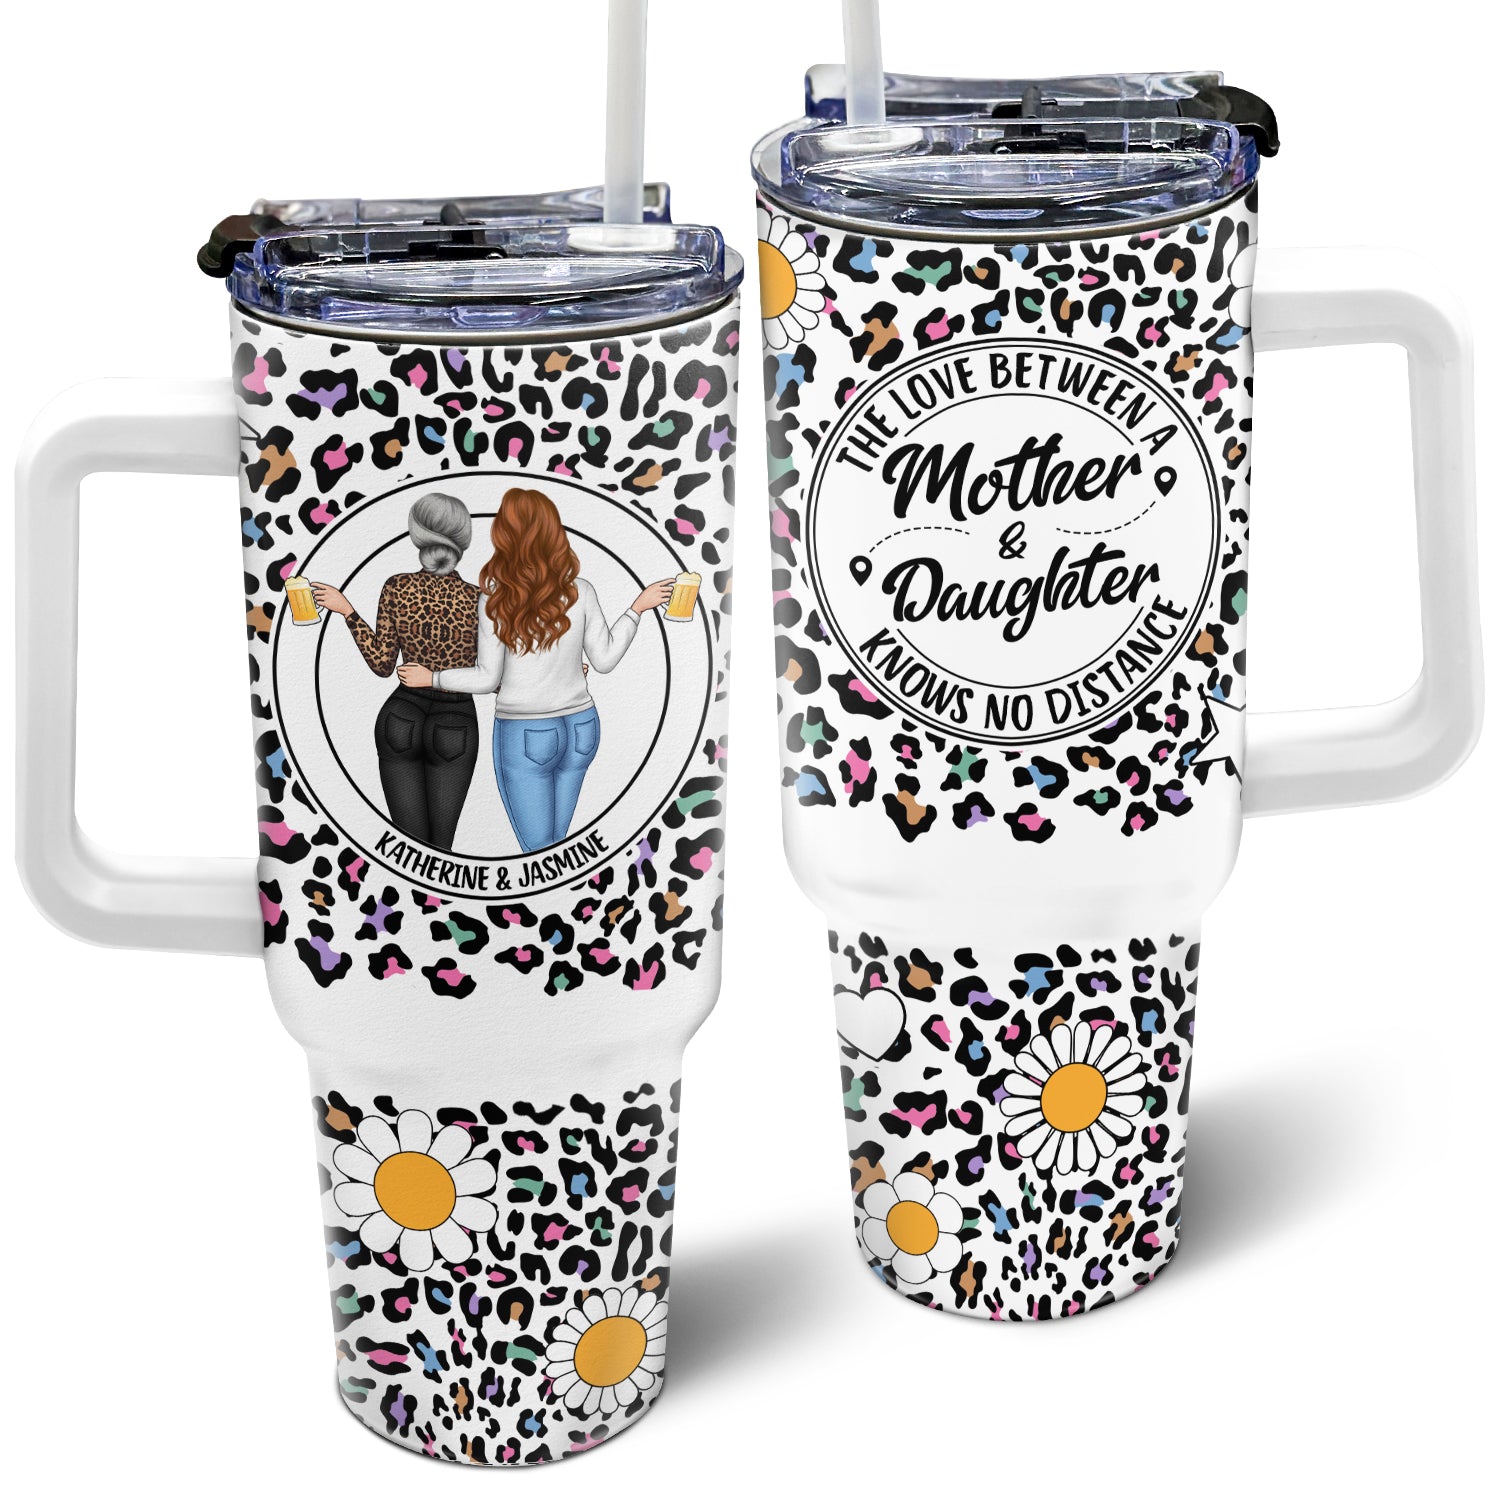 Knows No Distance - Gift For Mother And Daughter - Personalized 40oz Tumbler With Straw